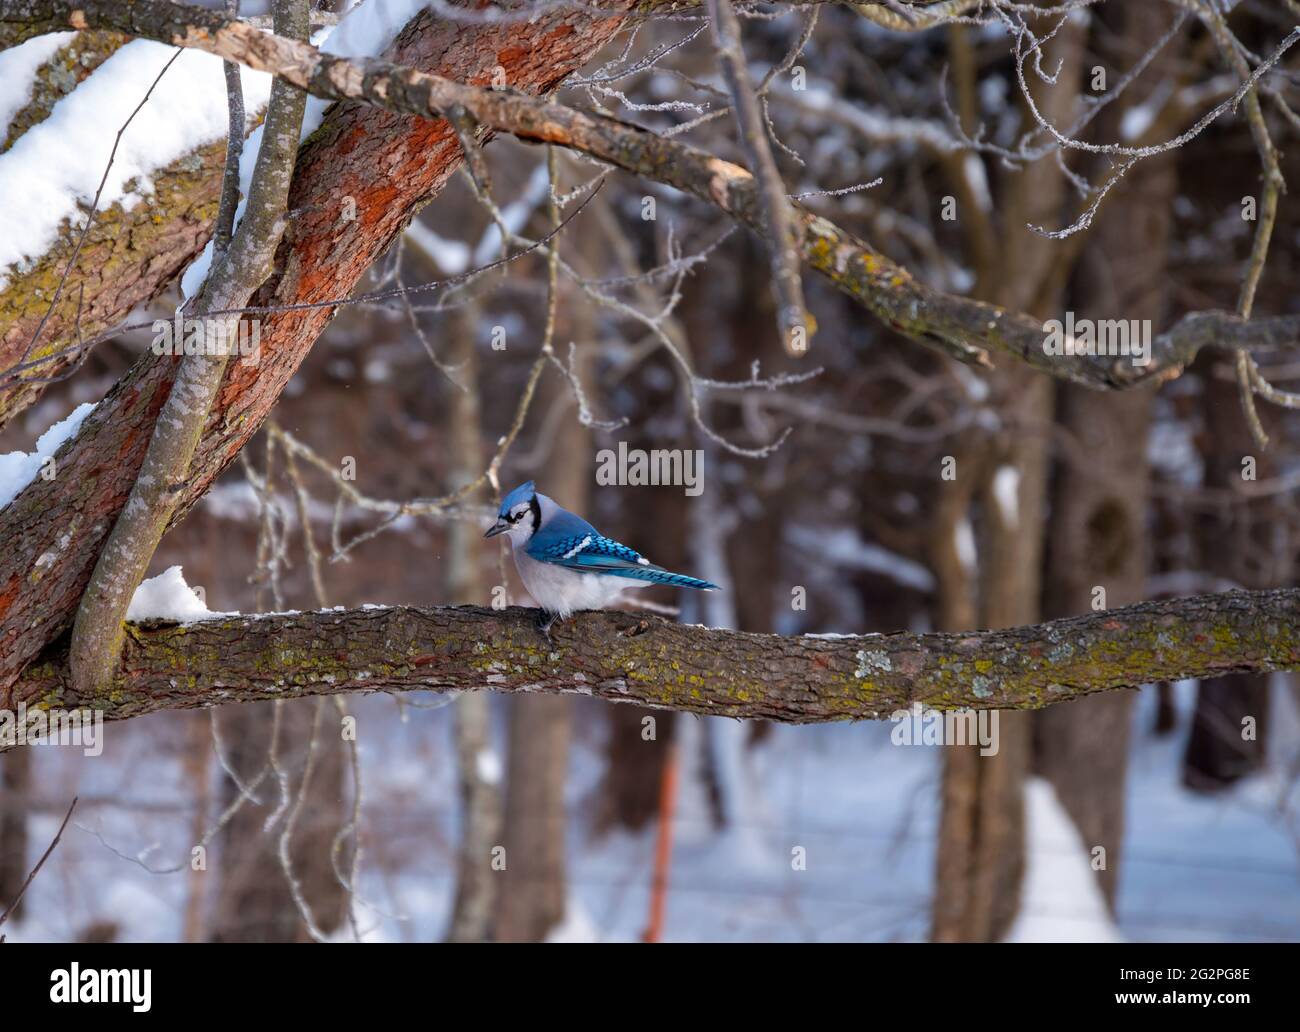 This beautiful blue jay rests peacefully on a branch of a redbud tree on a cold winter day in Missouri. Bokeh effect. Stock Photo